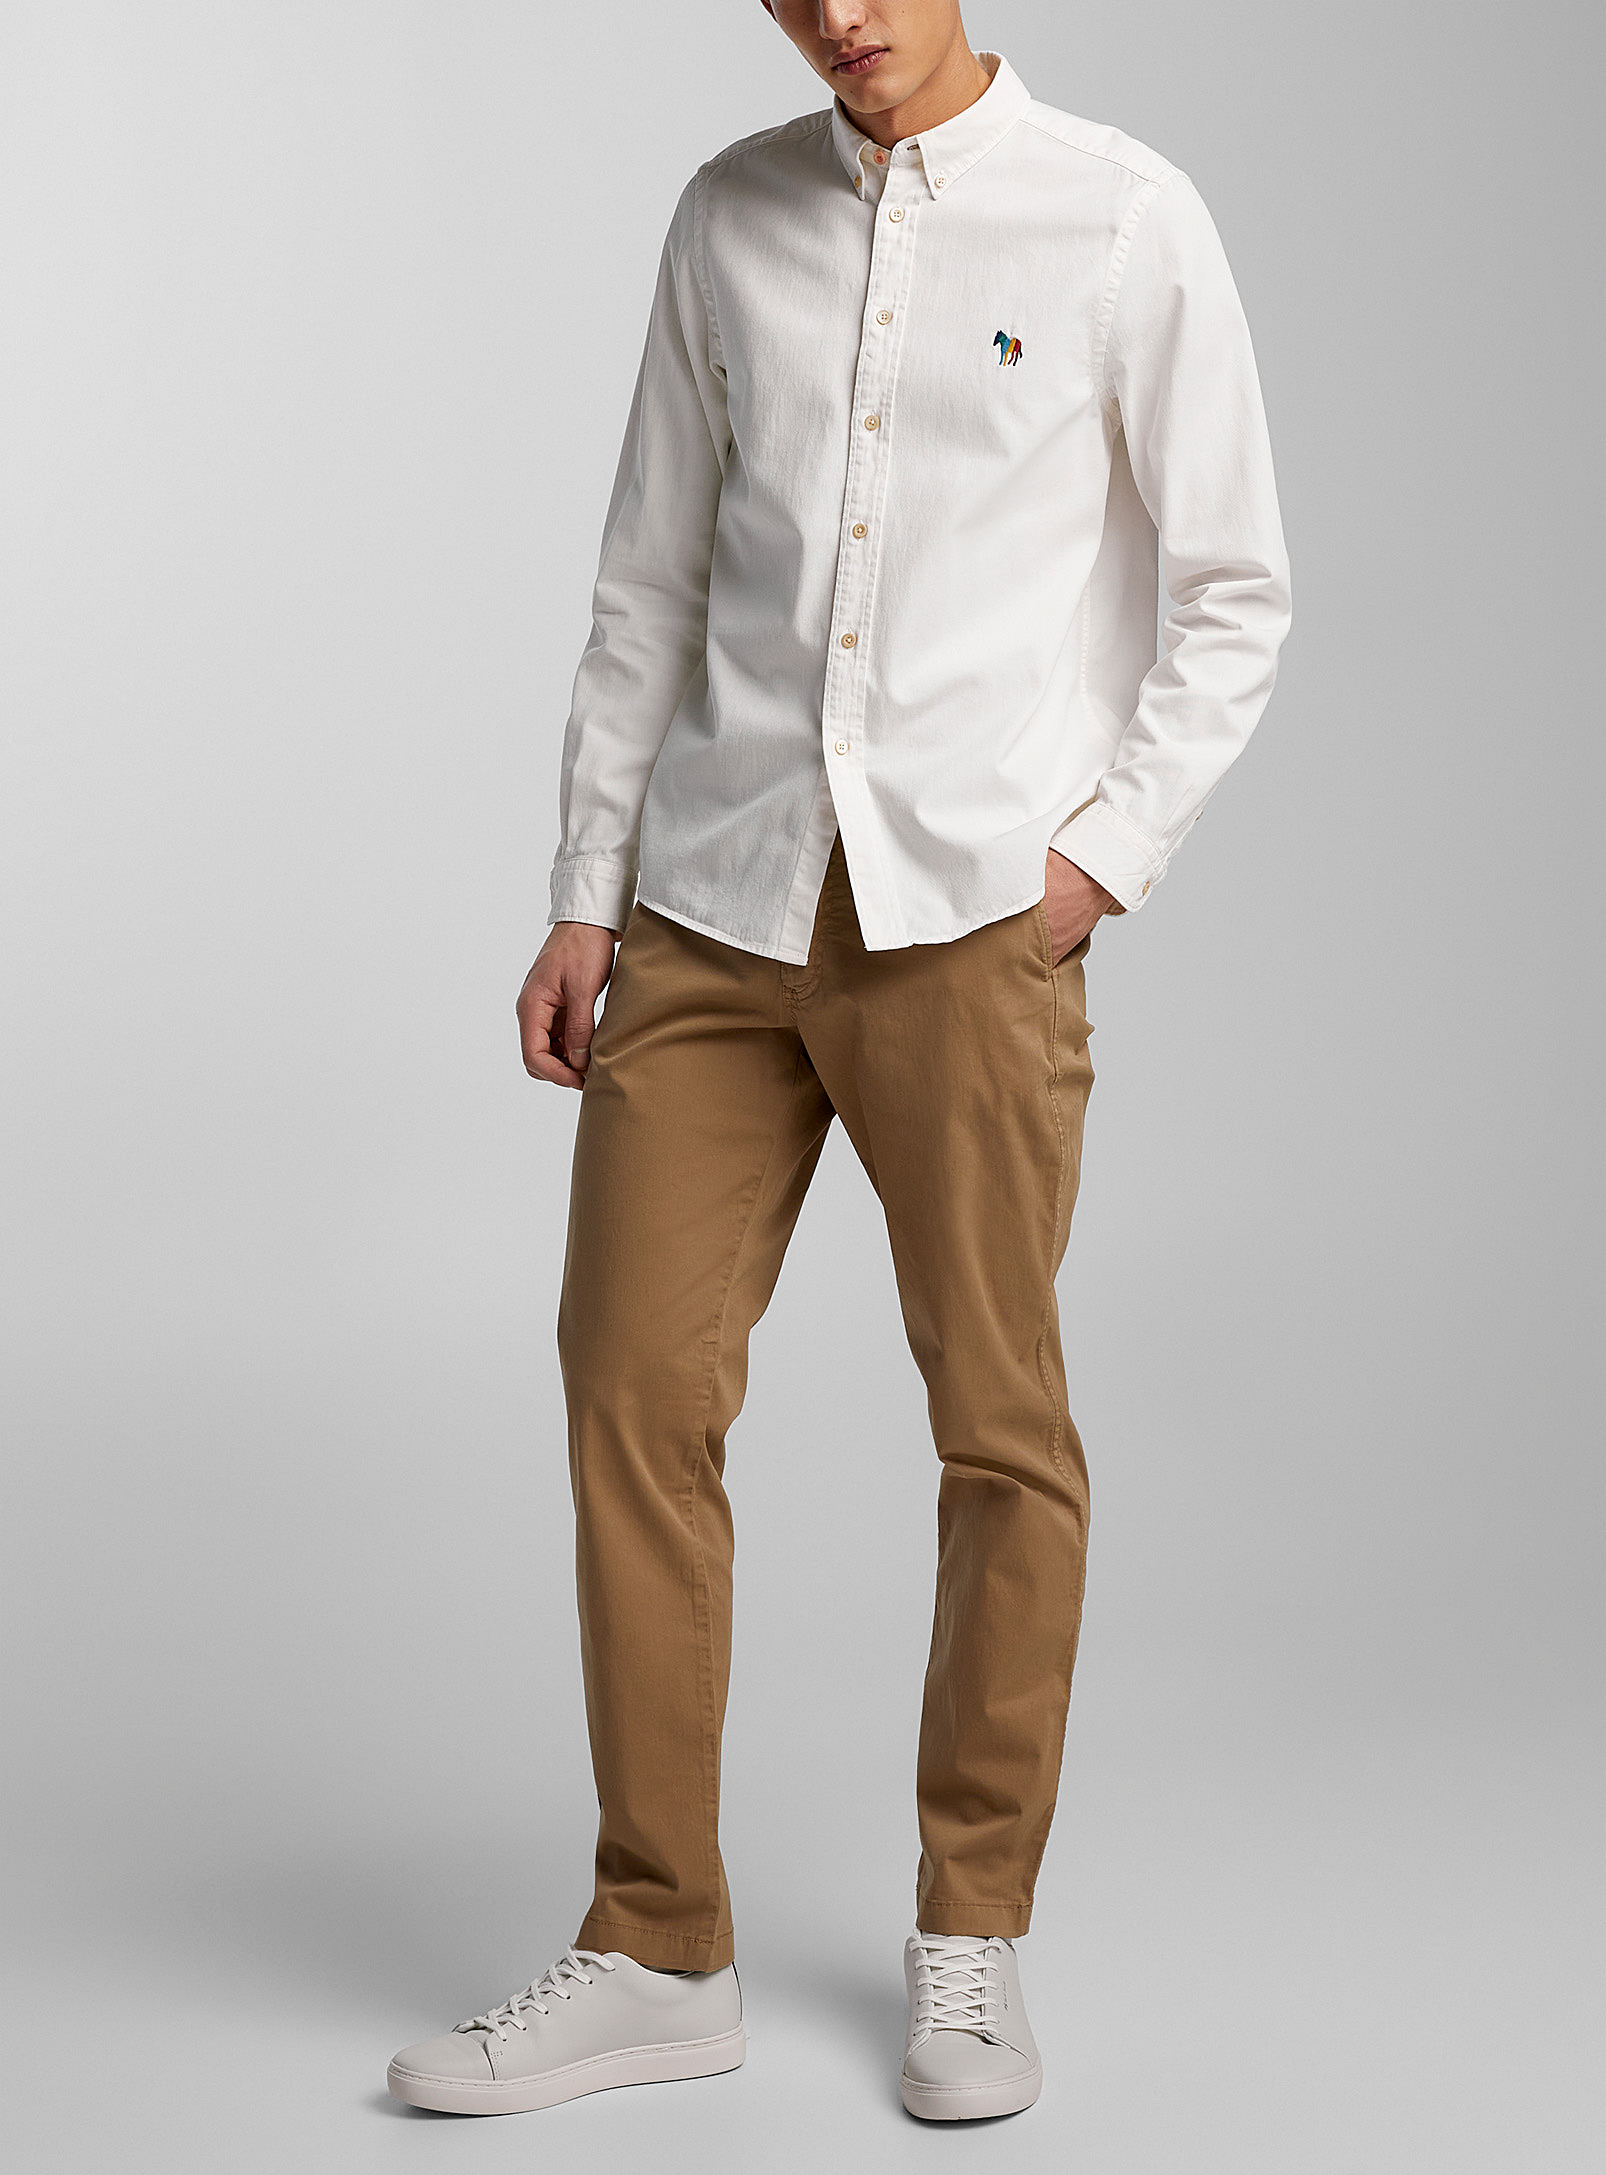 Ps By Paul Smith Embroidered Zebra Twill Shirt In Cream Beige